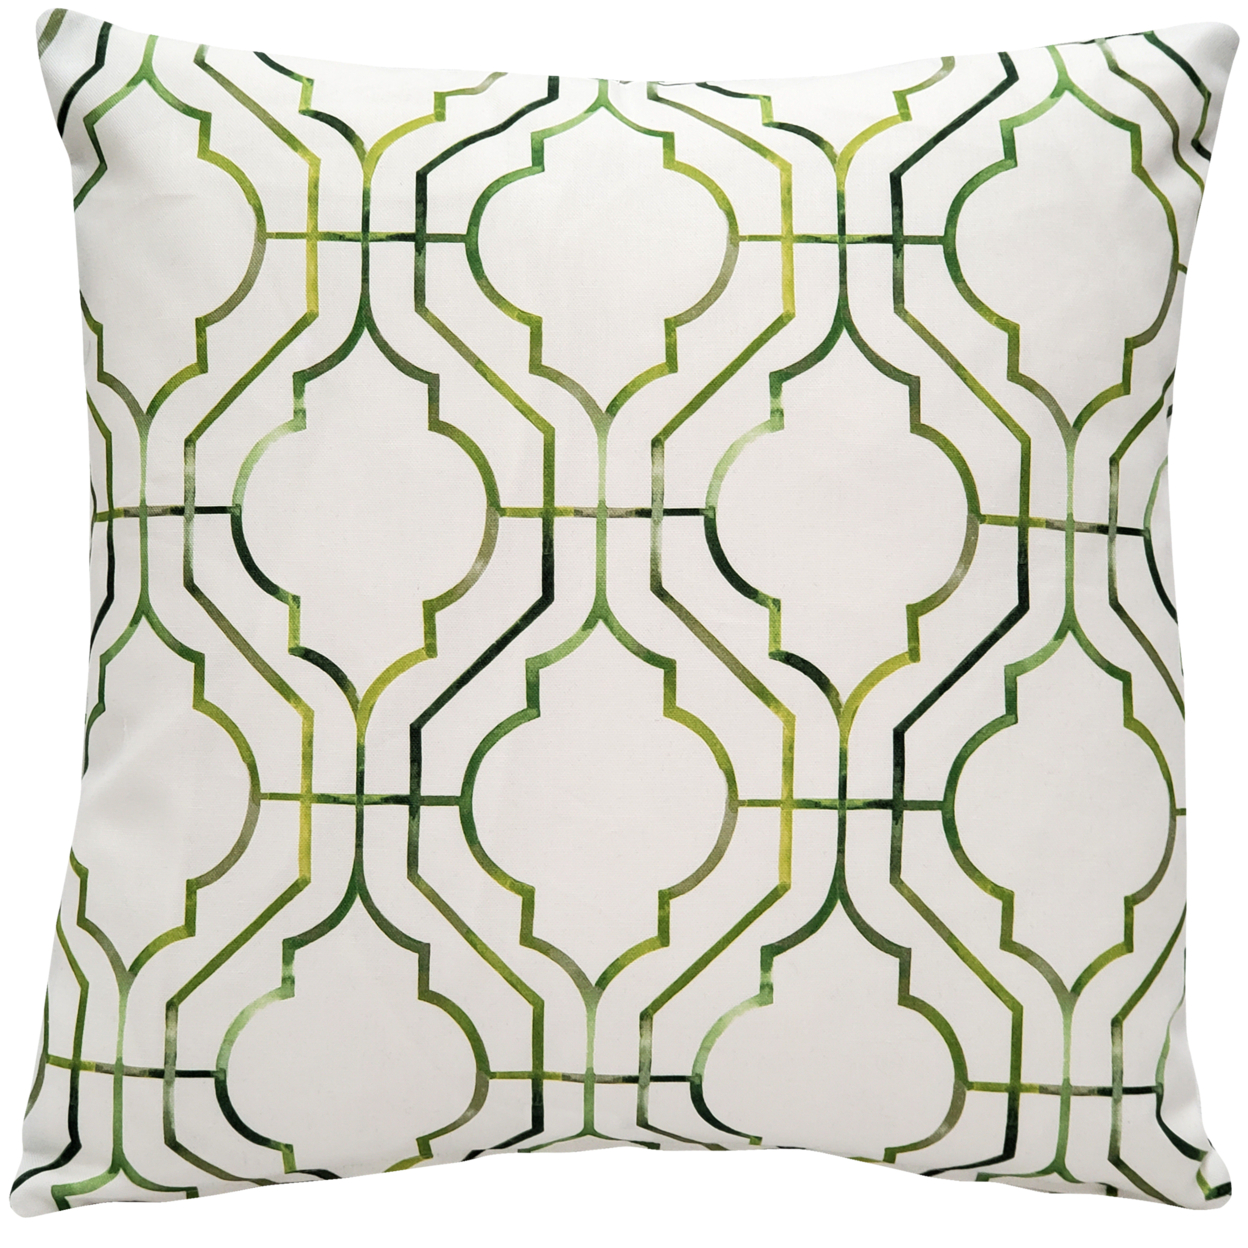 Biltmore Gate Green Throw Pillow 20x20 Inches Square, Complete Pillow with Polyfill Pillow Insert